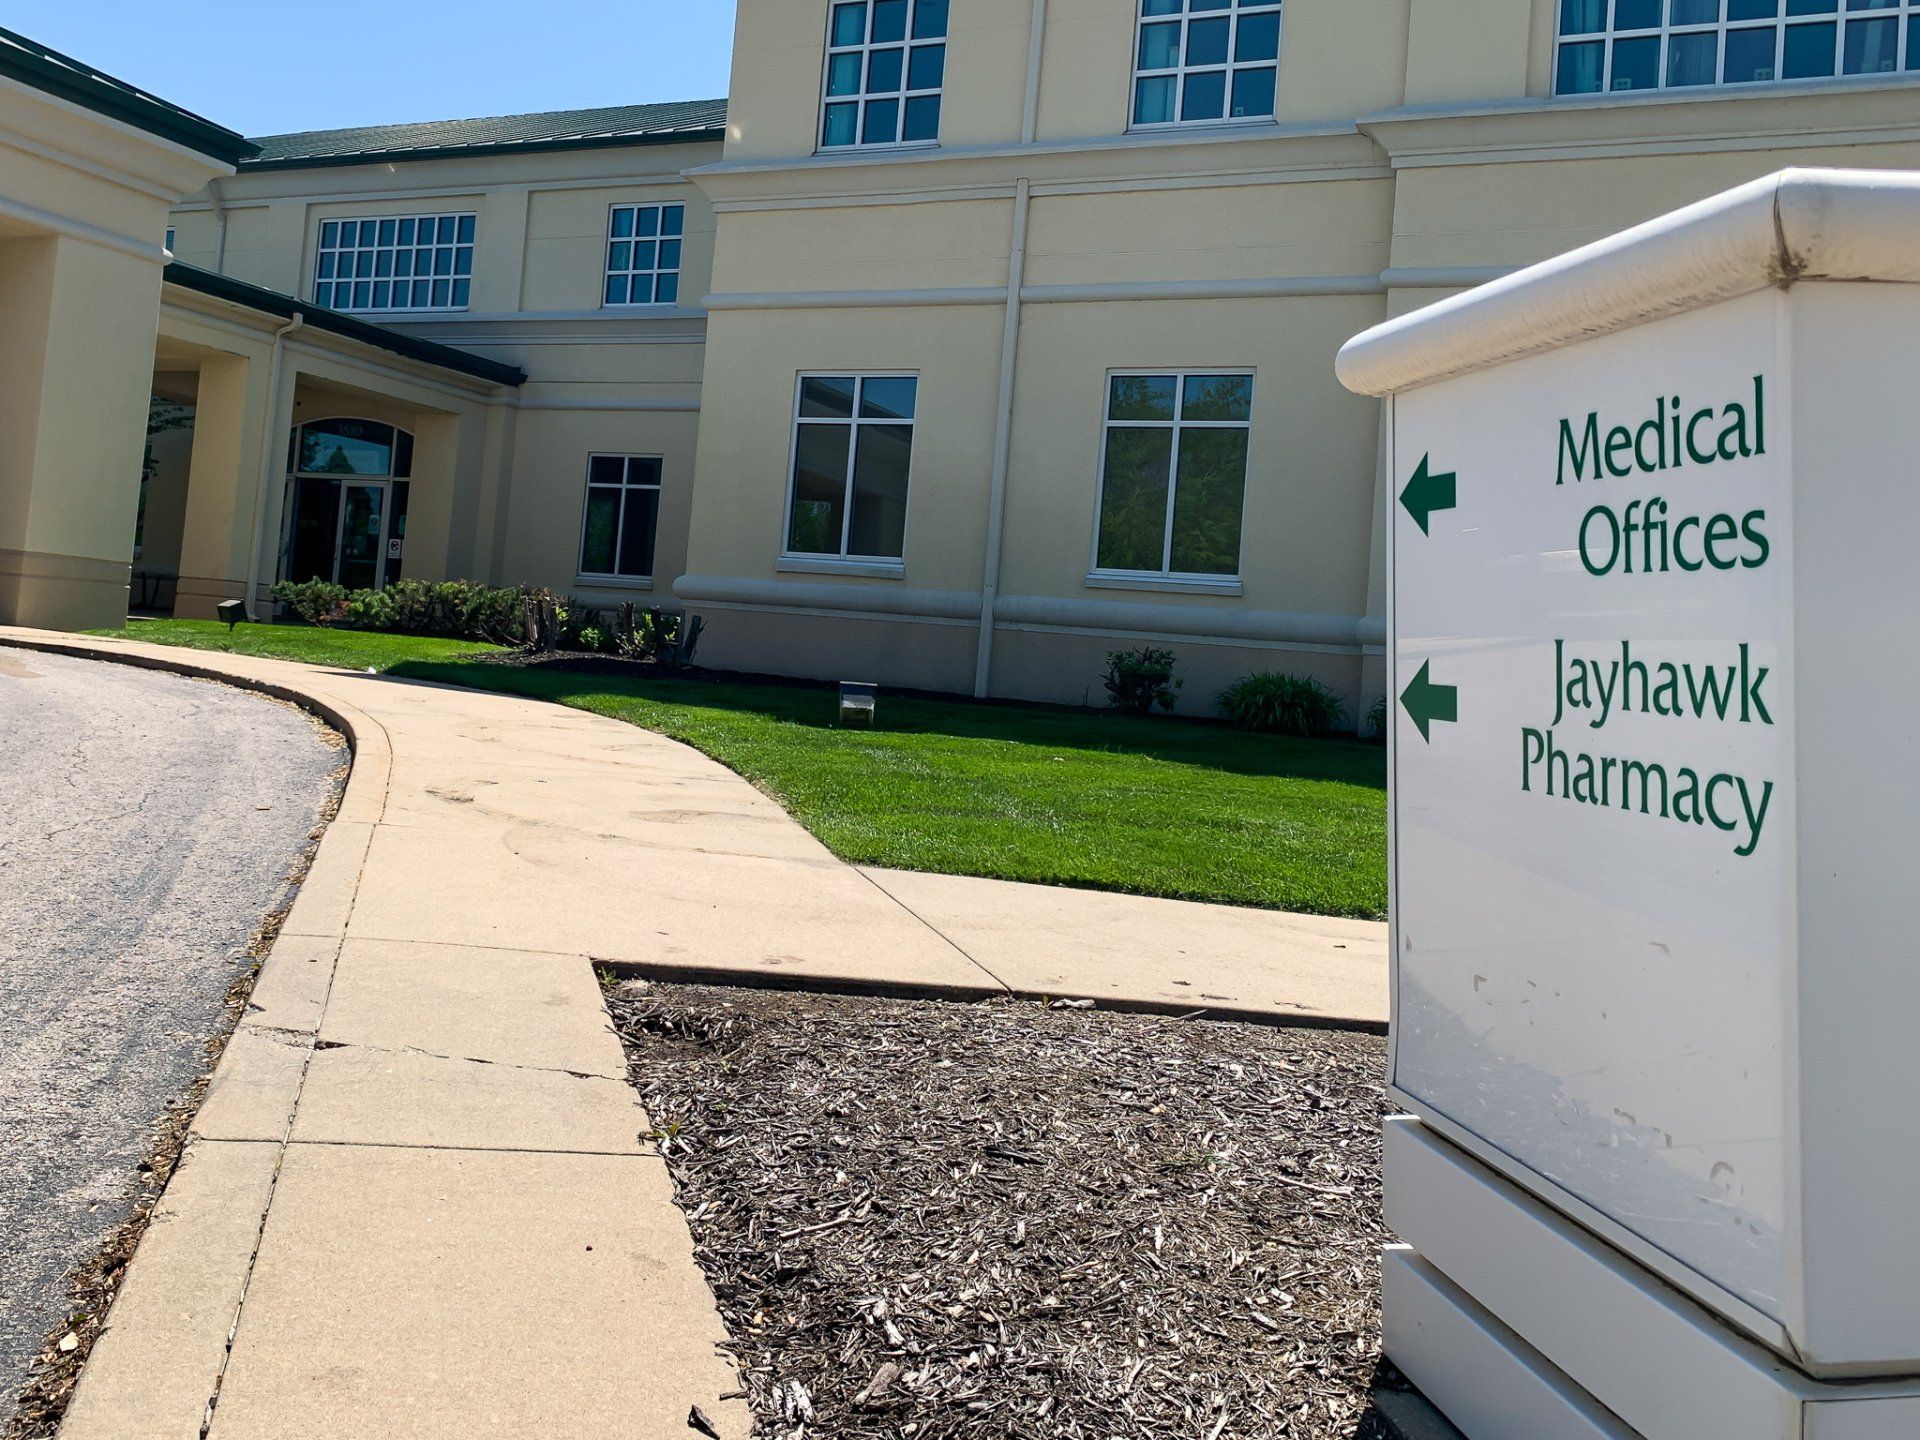 A sign for medical offices and jayhawk pharmacy